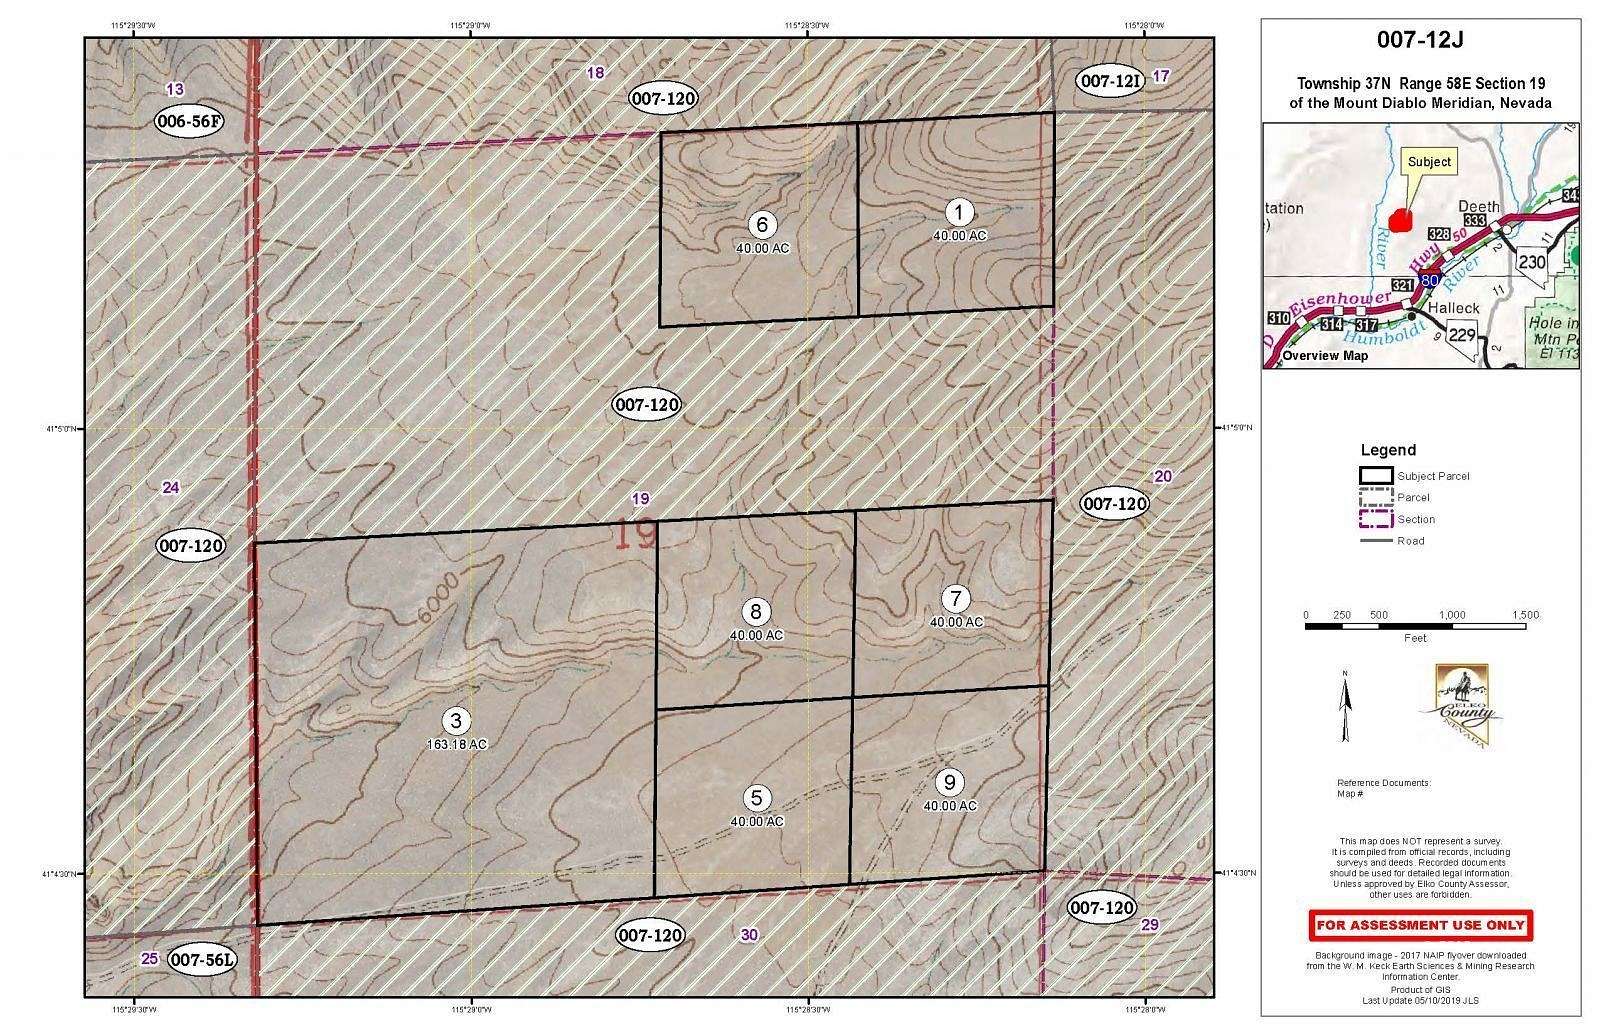 40 Acres of Land for Sale in Elko, Nevada